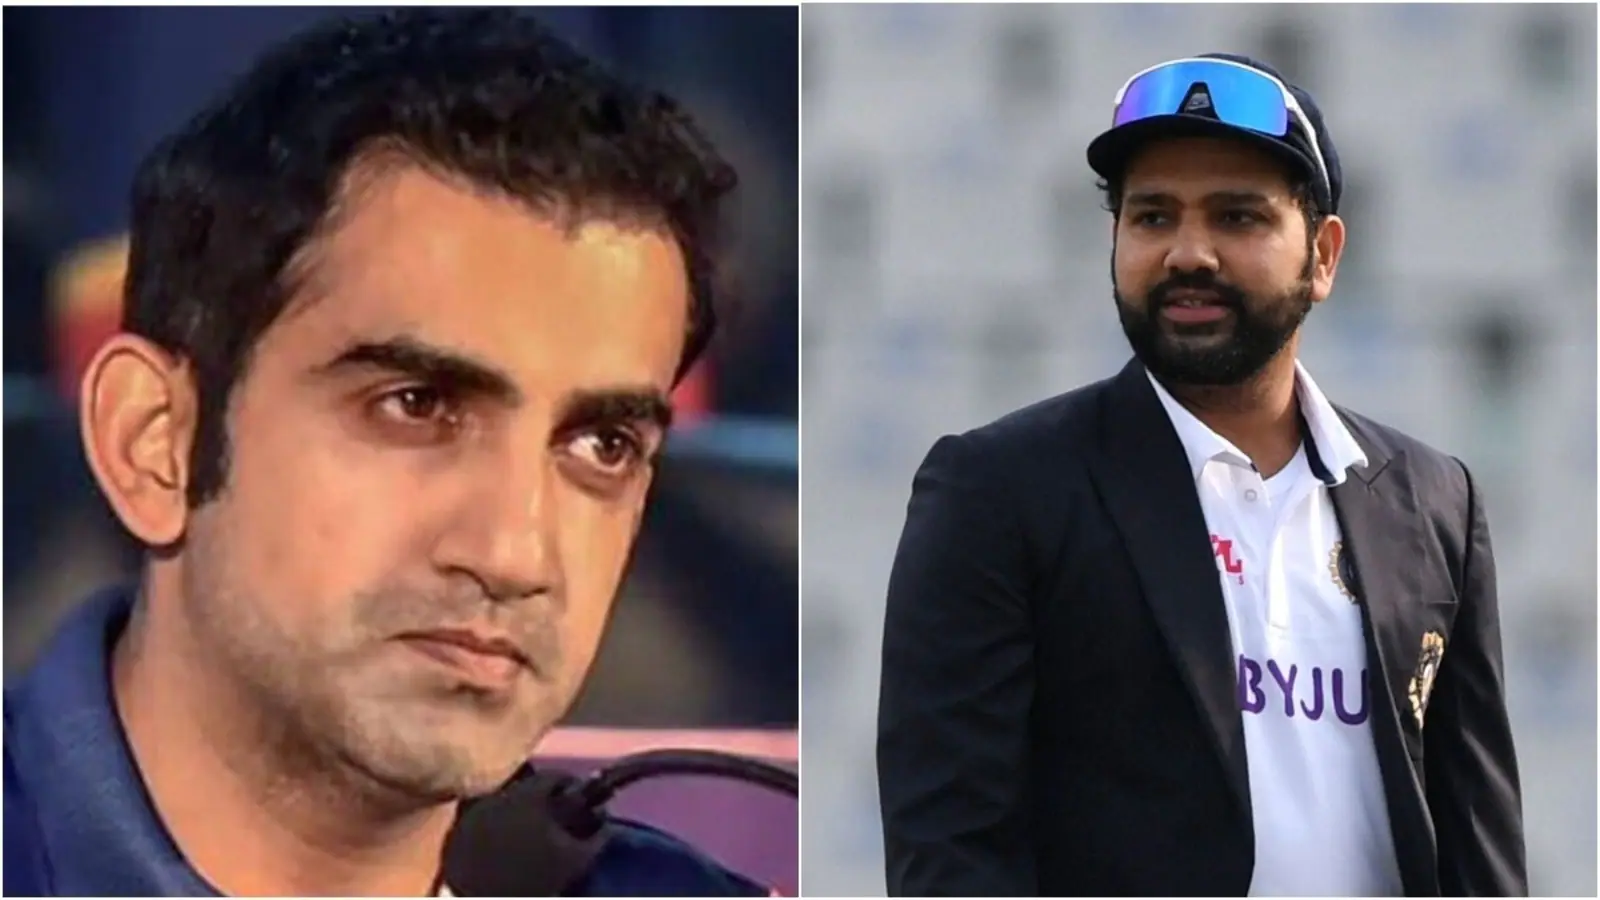 ‘Bowlers win you matches. Kohli developed that strength’: Gambhir says Rohit won’t face ‘big challenge’ as Test captain